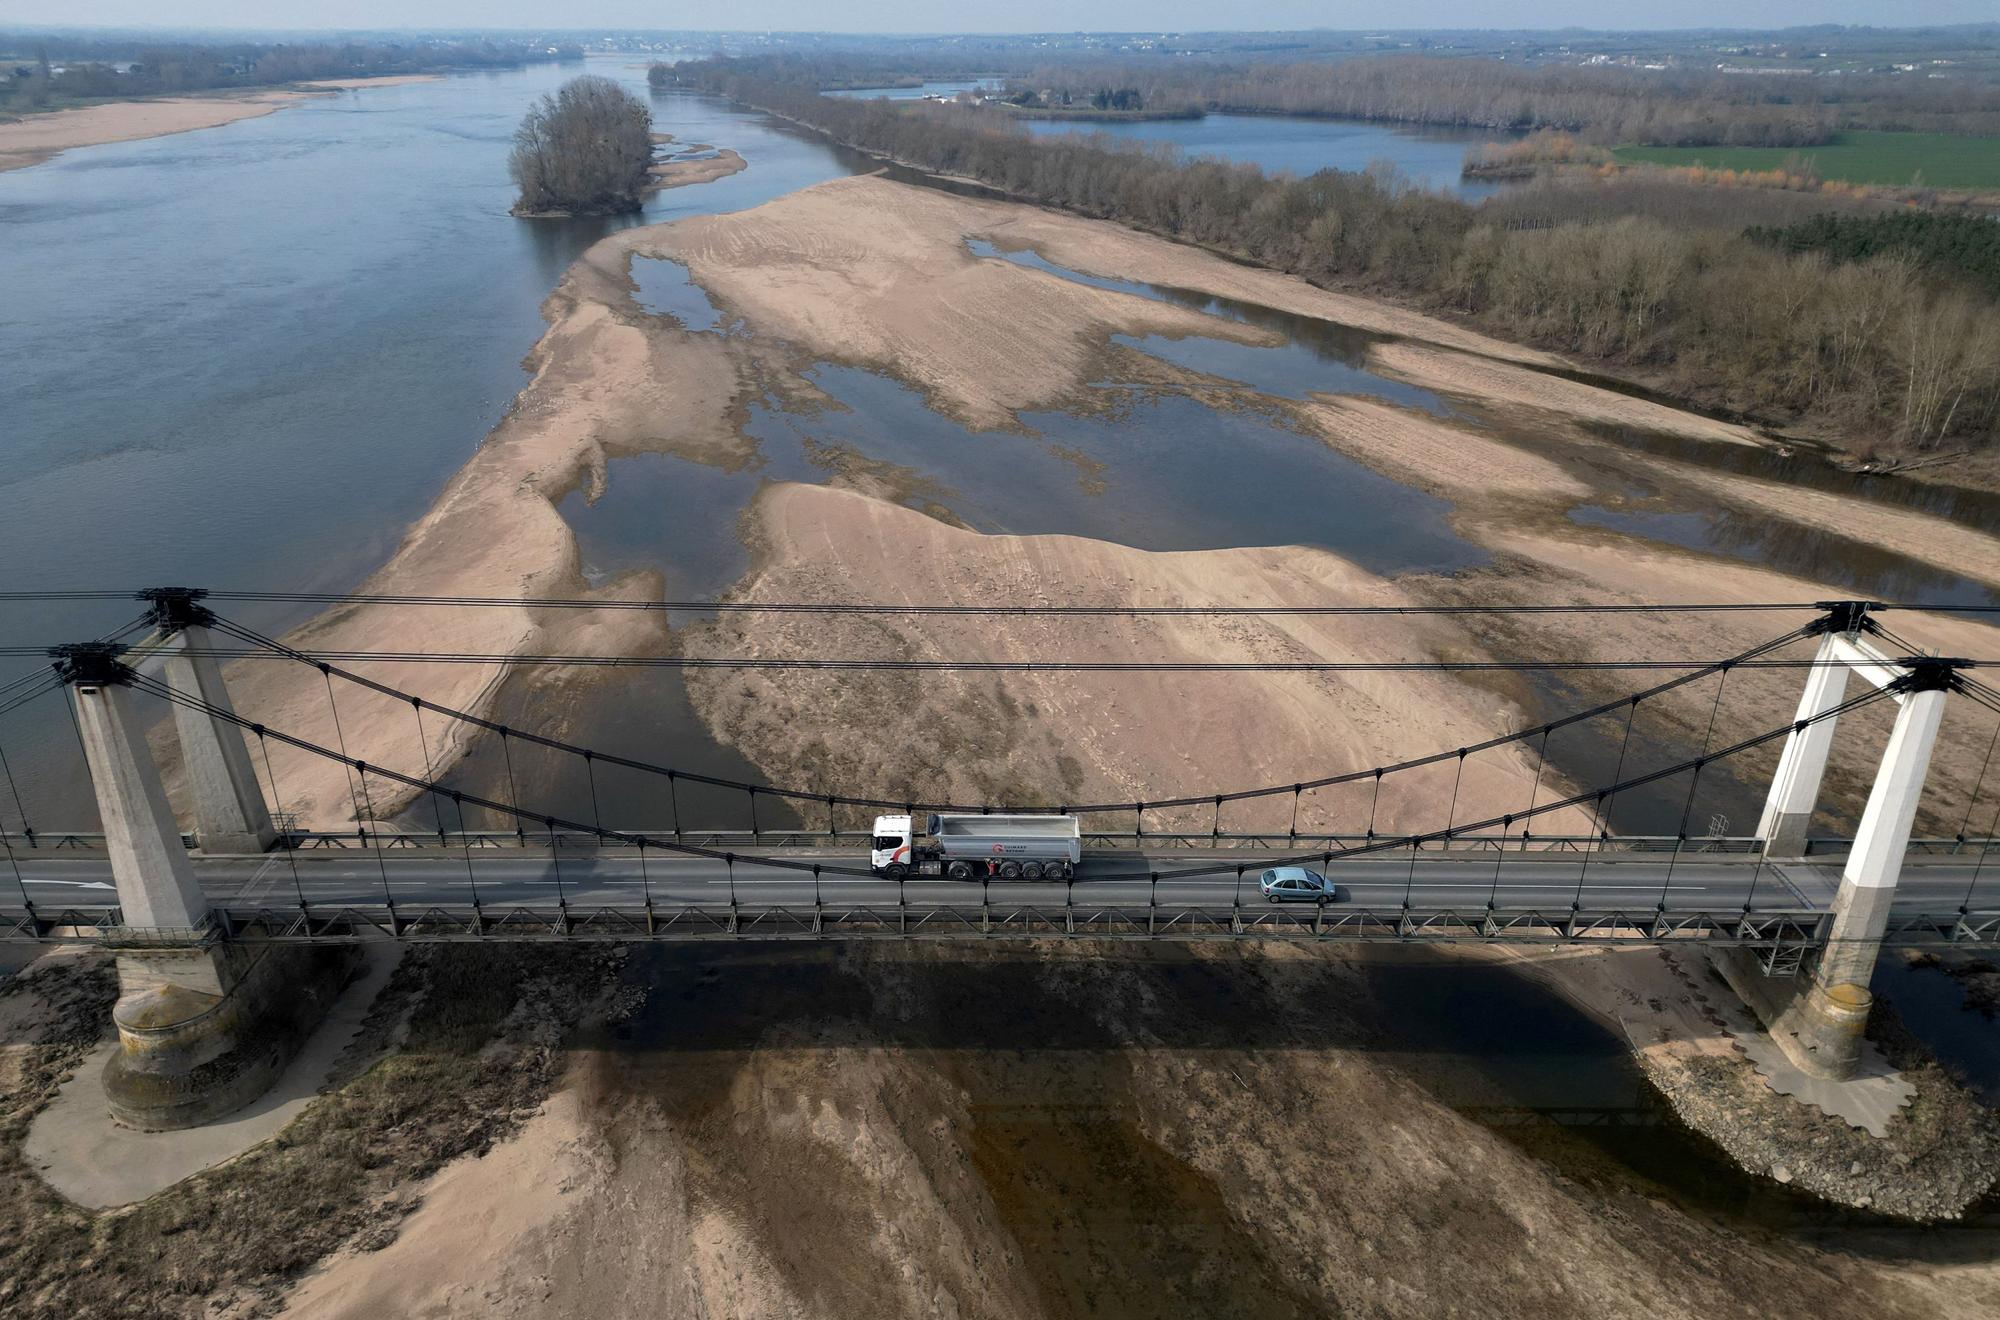 Winter drought in France lets sandbanks reappear too soon in the Loire River